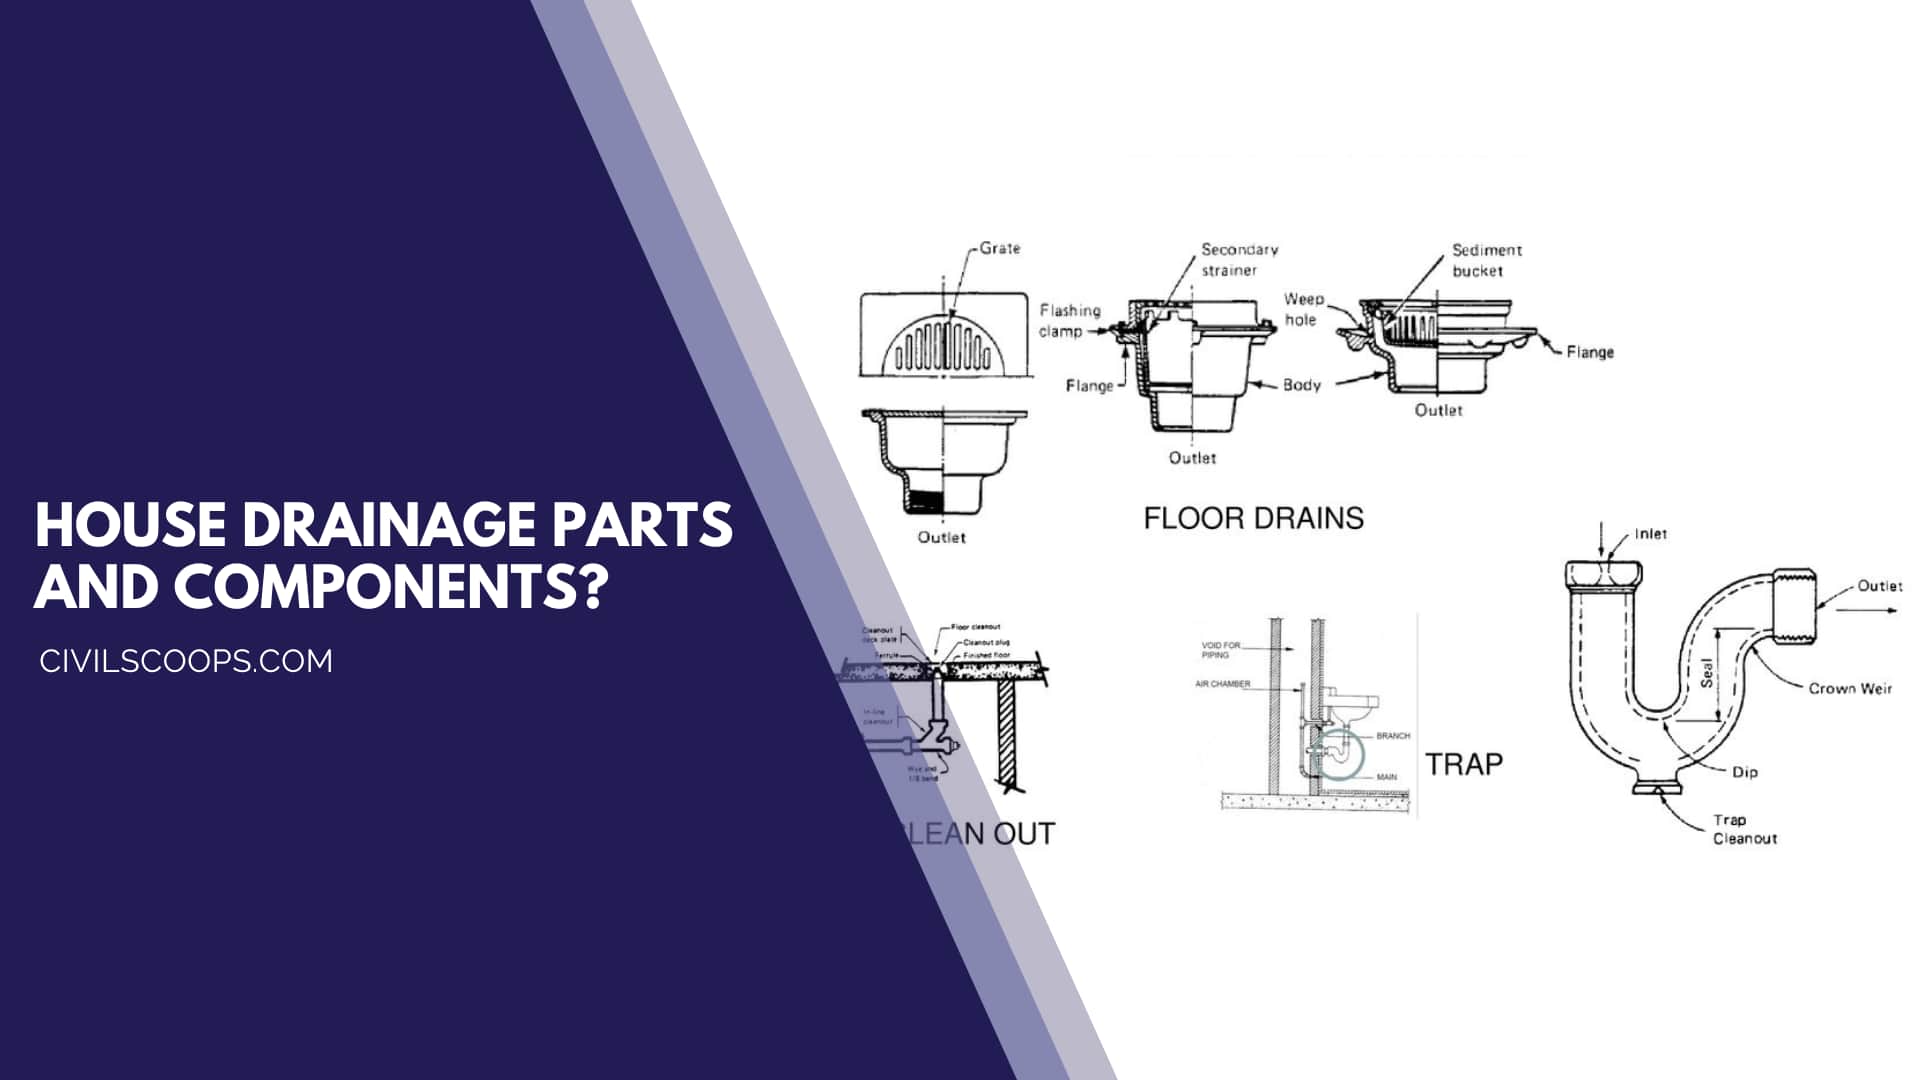 House Drainage Parts and Components